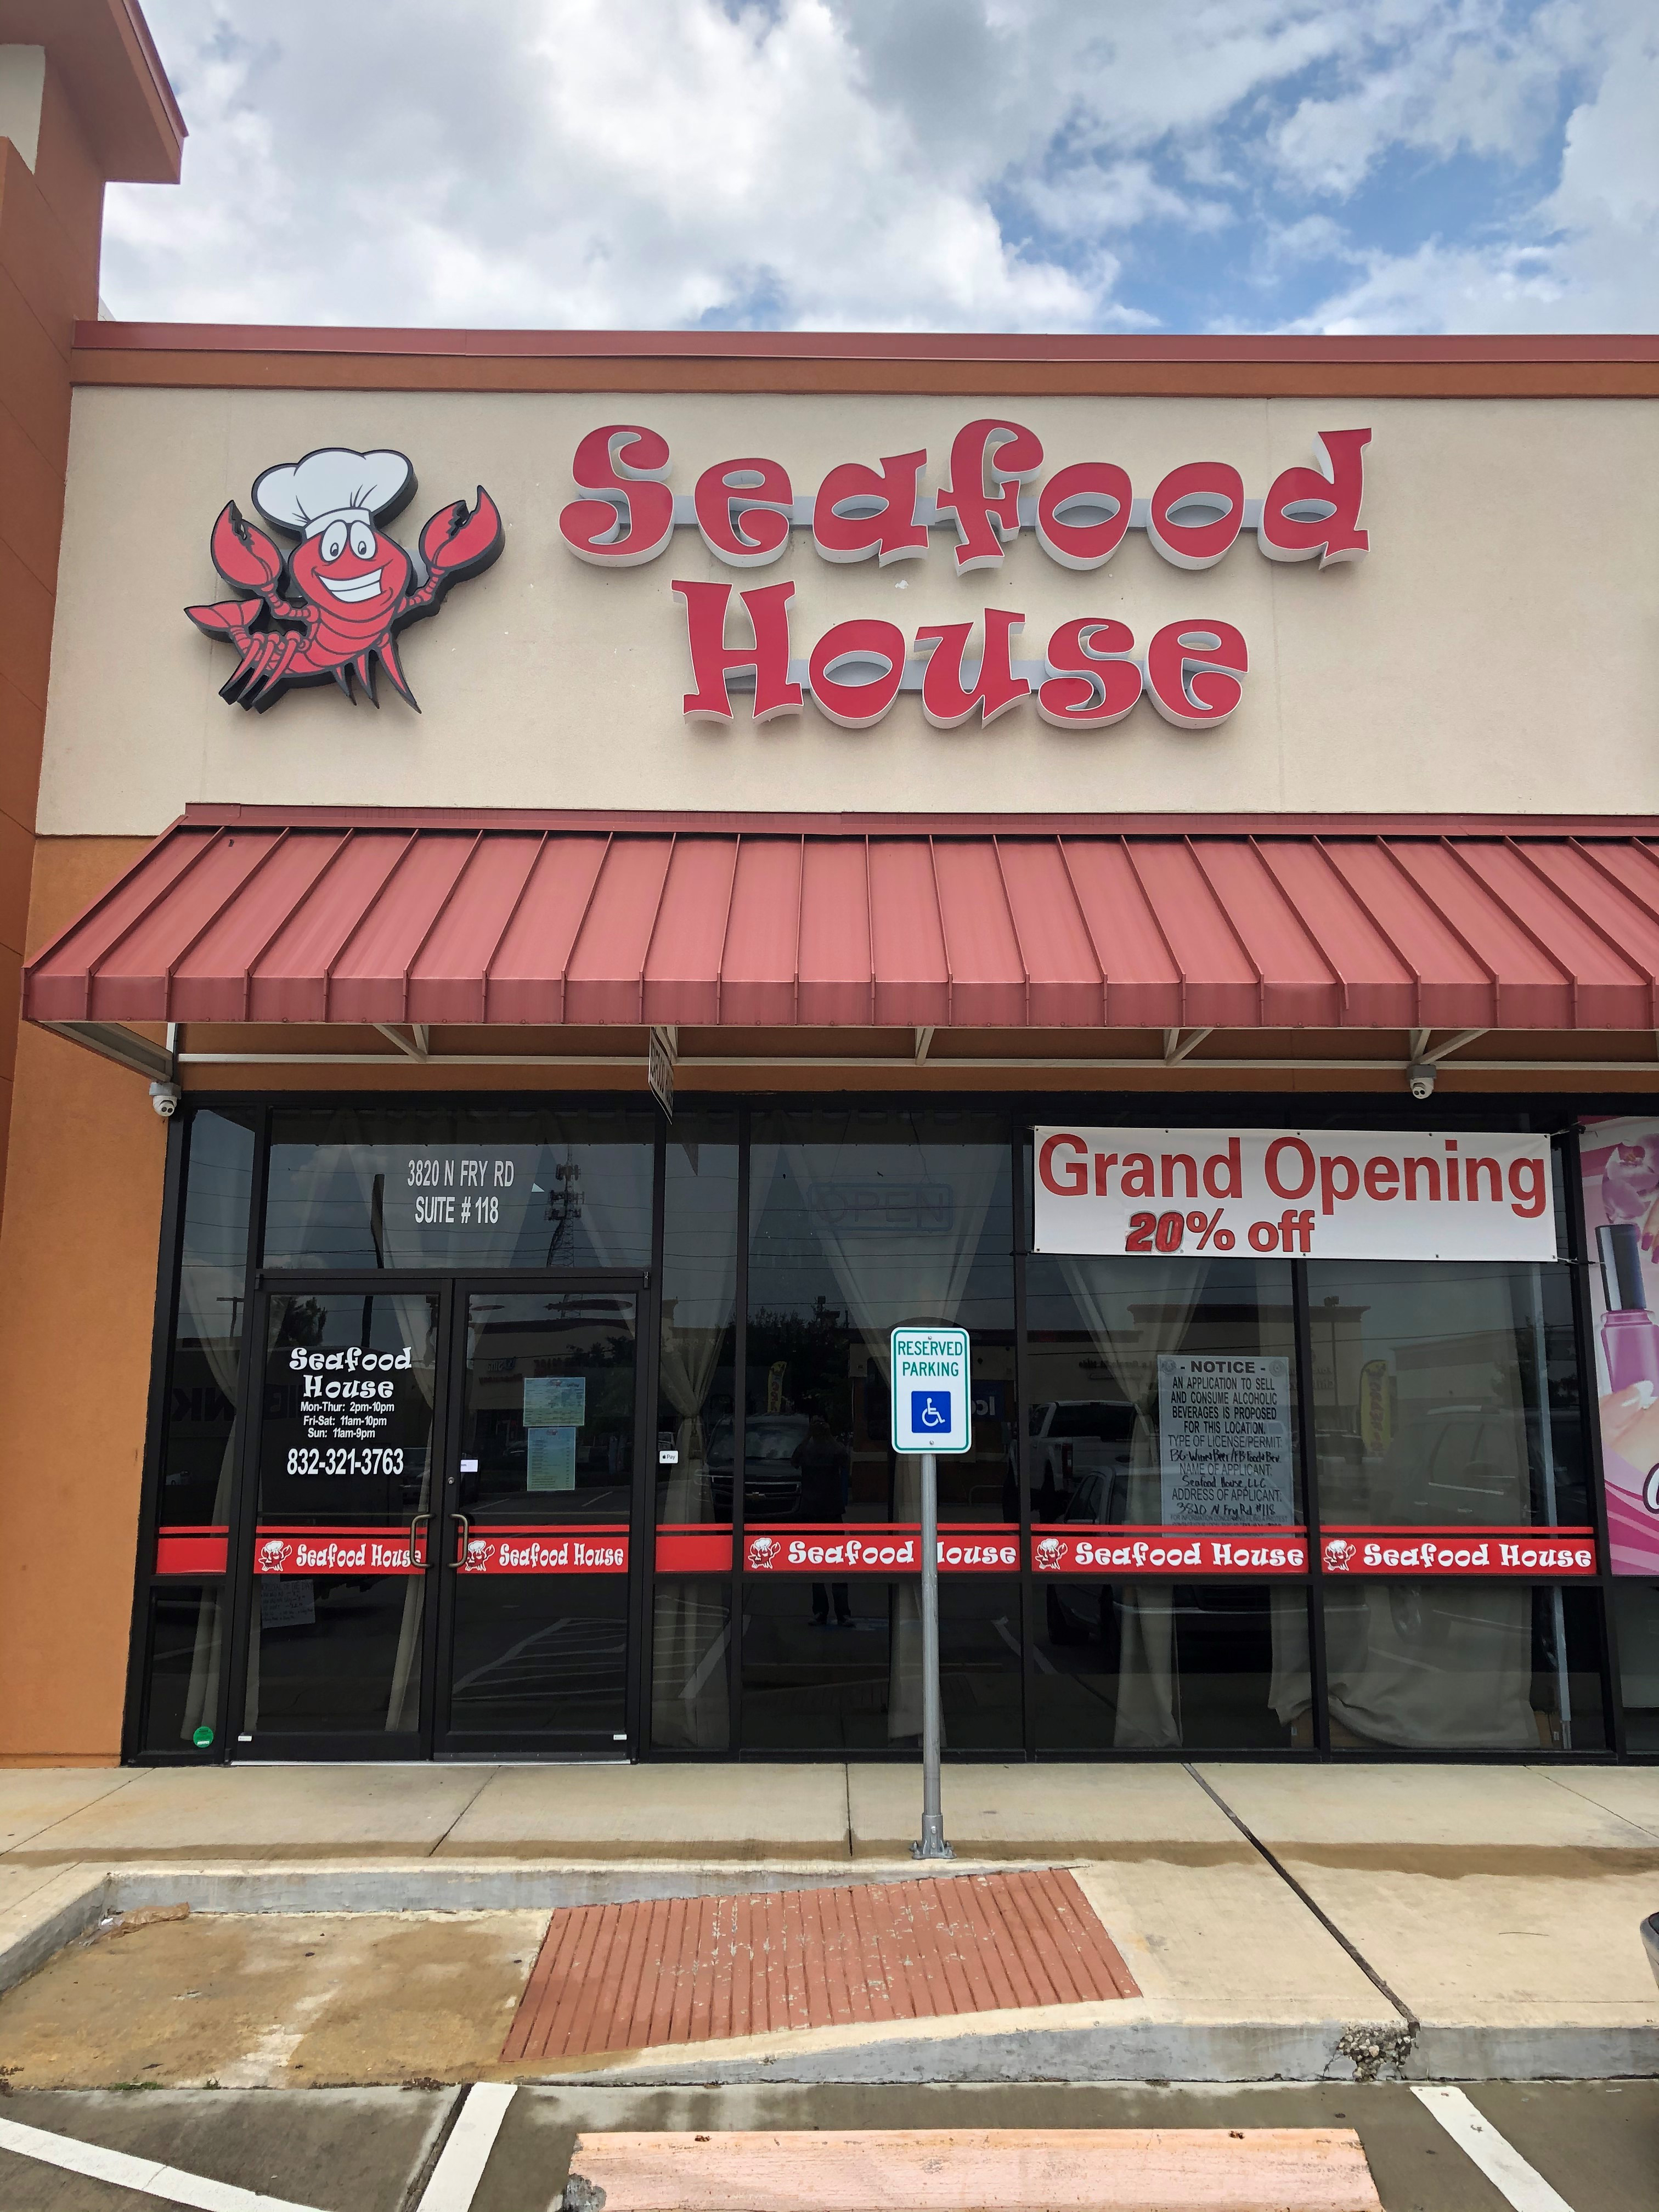 24 hour food places open near me